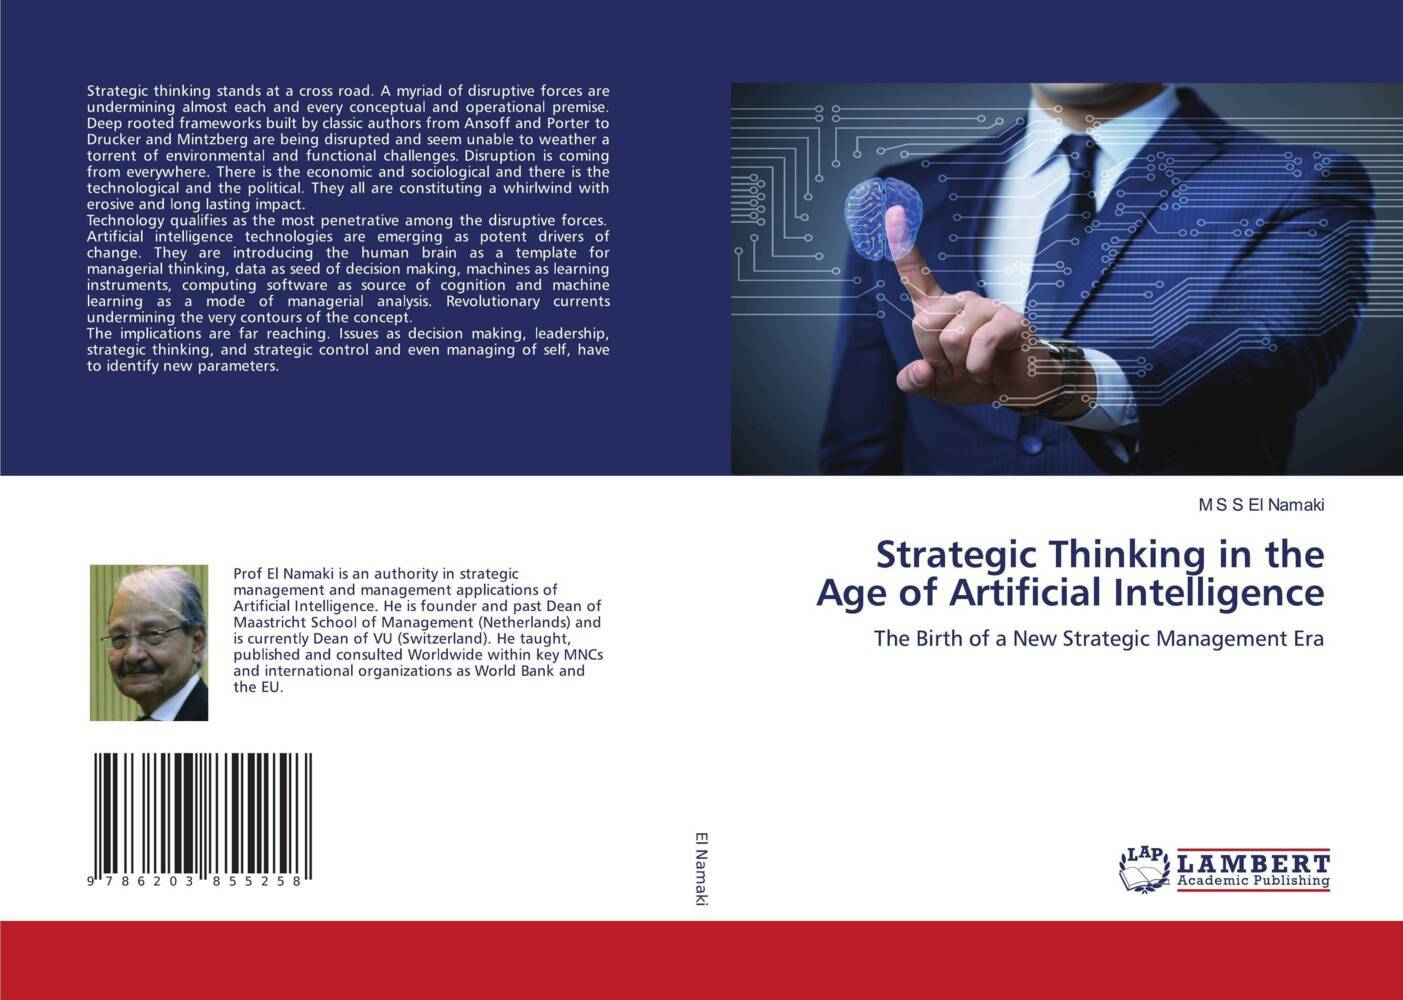 Strategic Thinking in the Age of Artificial Intelligence